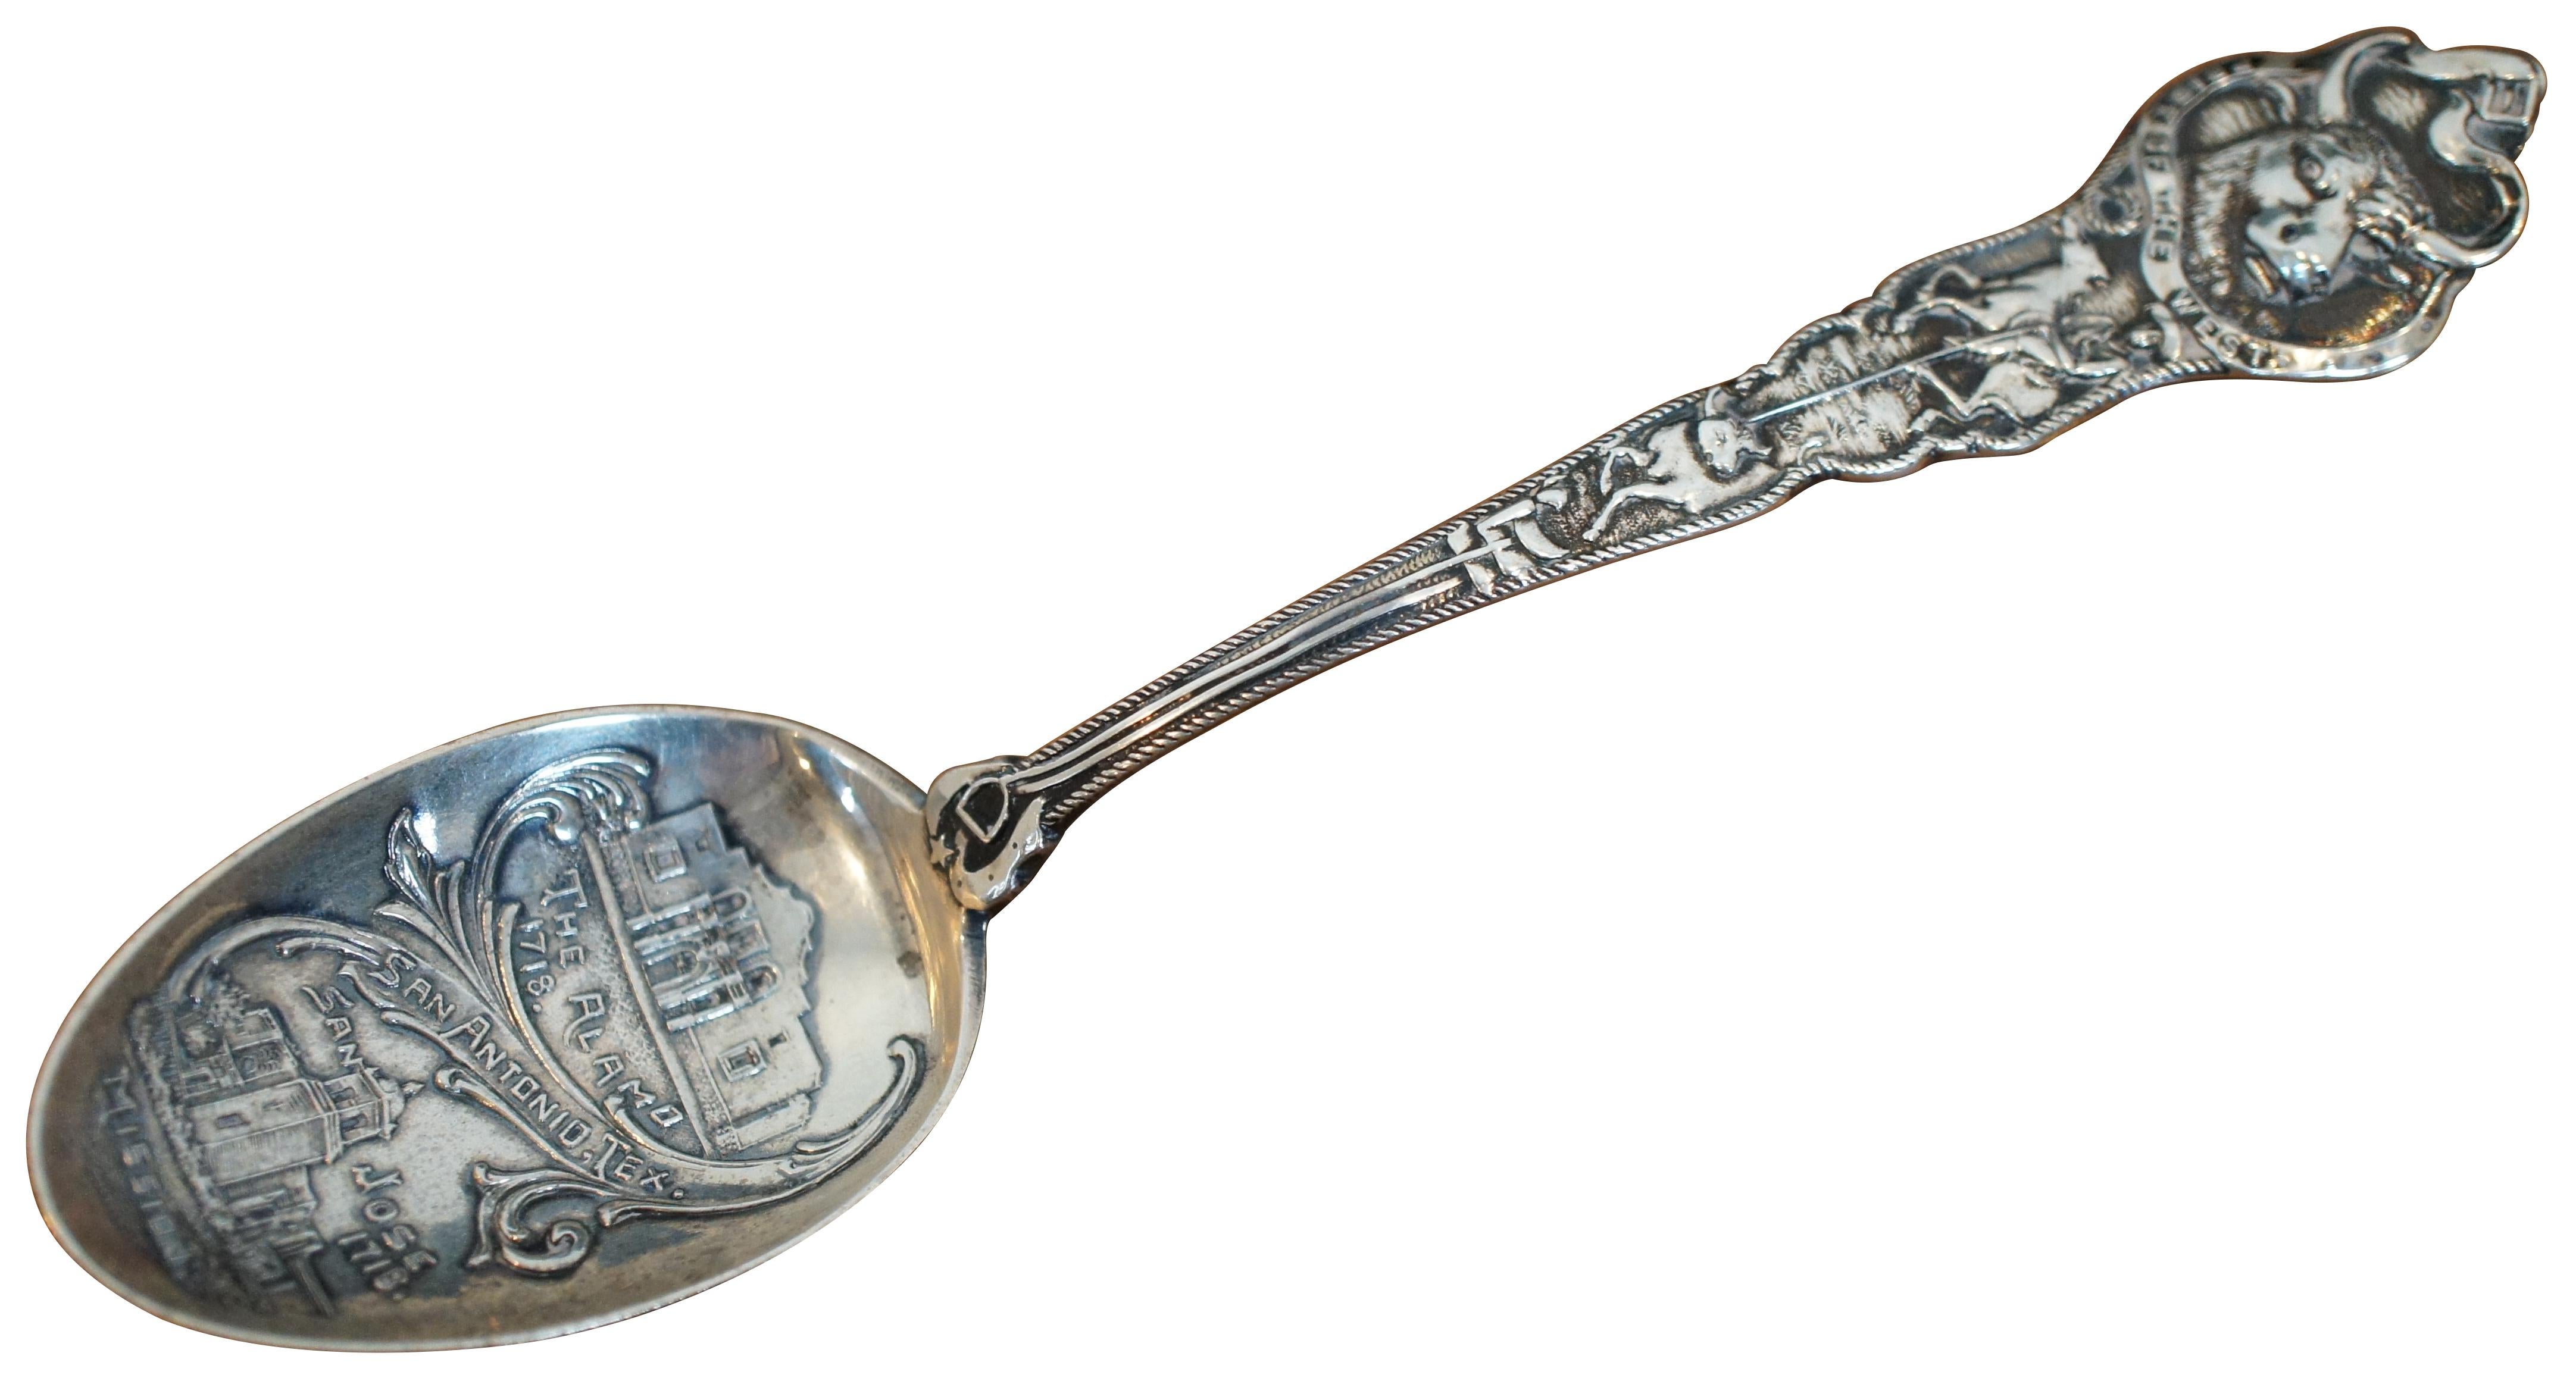 Antique early 20th century sterling silver souvenir spoon of San Antonio, Texas by Paye & Baker. The handle is topped with a bull and the phrase “Pride of the West” on a ribbon, above a handle decorated with a cowboy lassoing another bull. The bowl